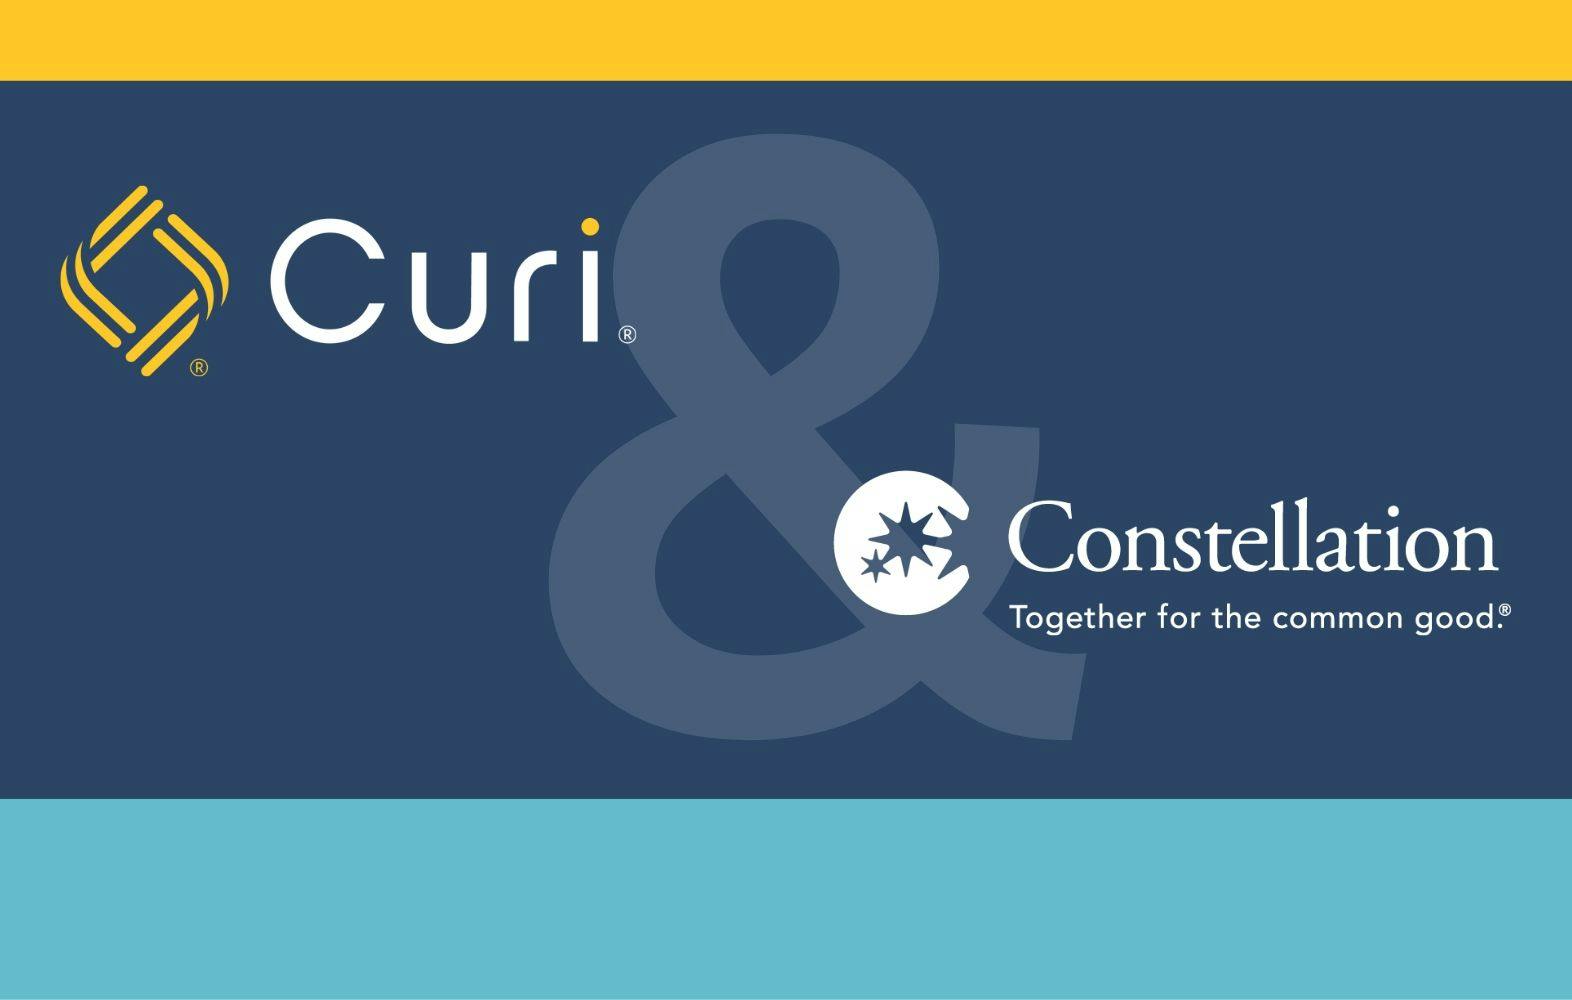 Curi Holdings, Inc. and Constellation, Inc. Complete Merger